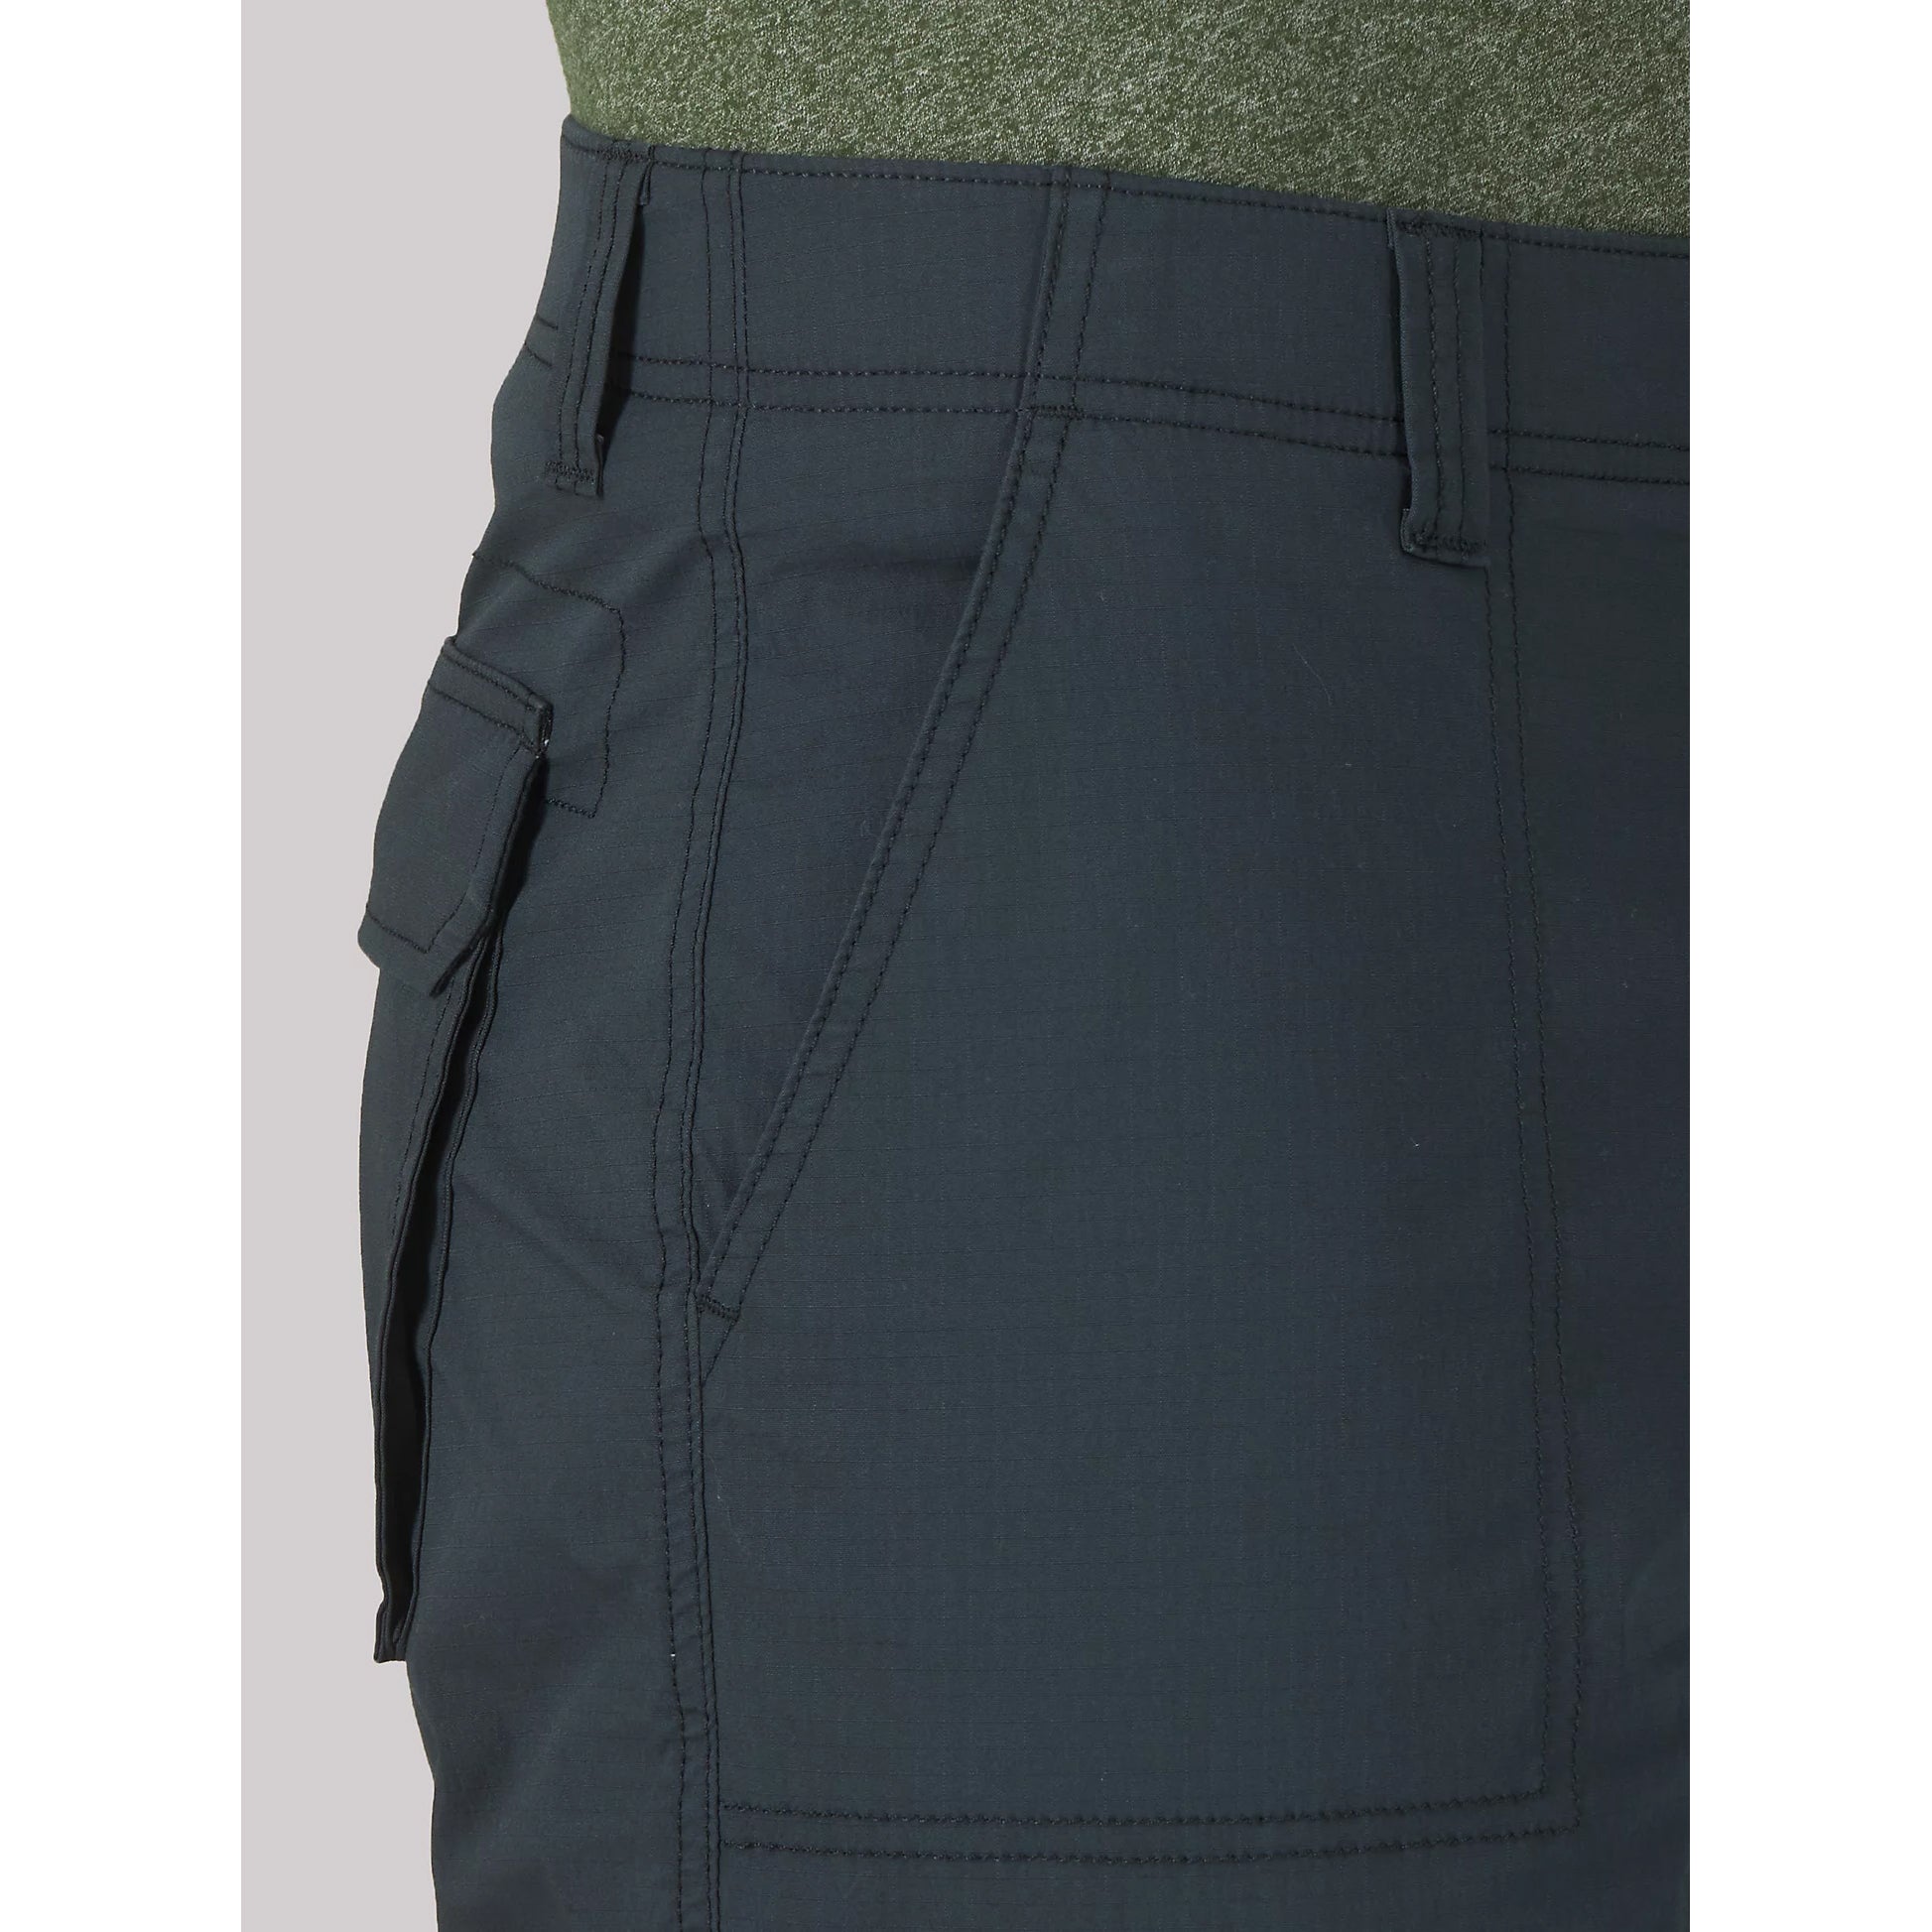 Lee 2314312 Extreme Motion Cameron Cargo Shorts in Charcoal Pocket Detail